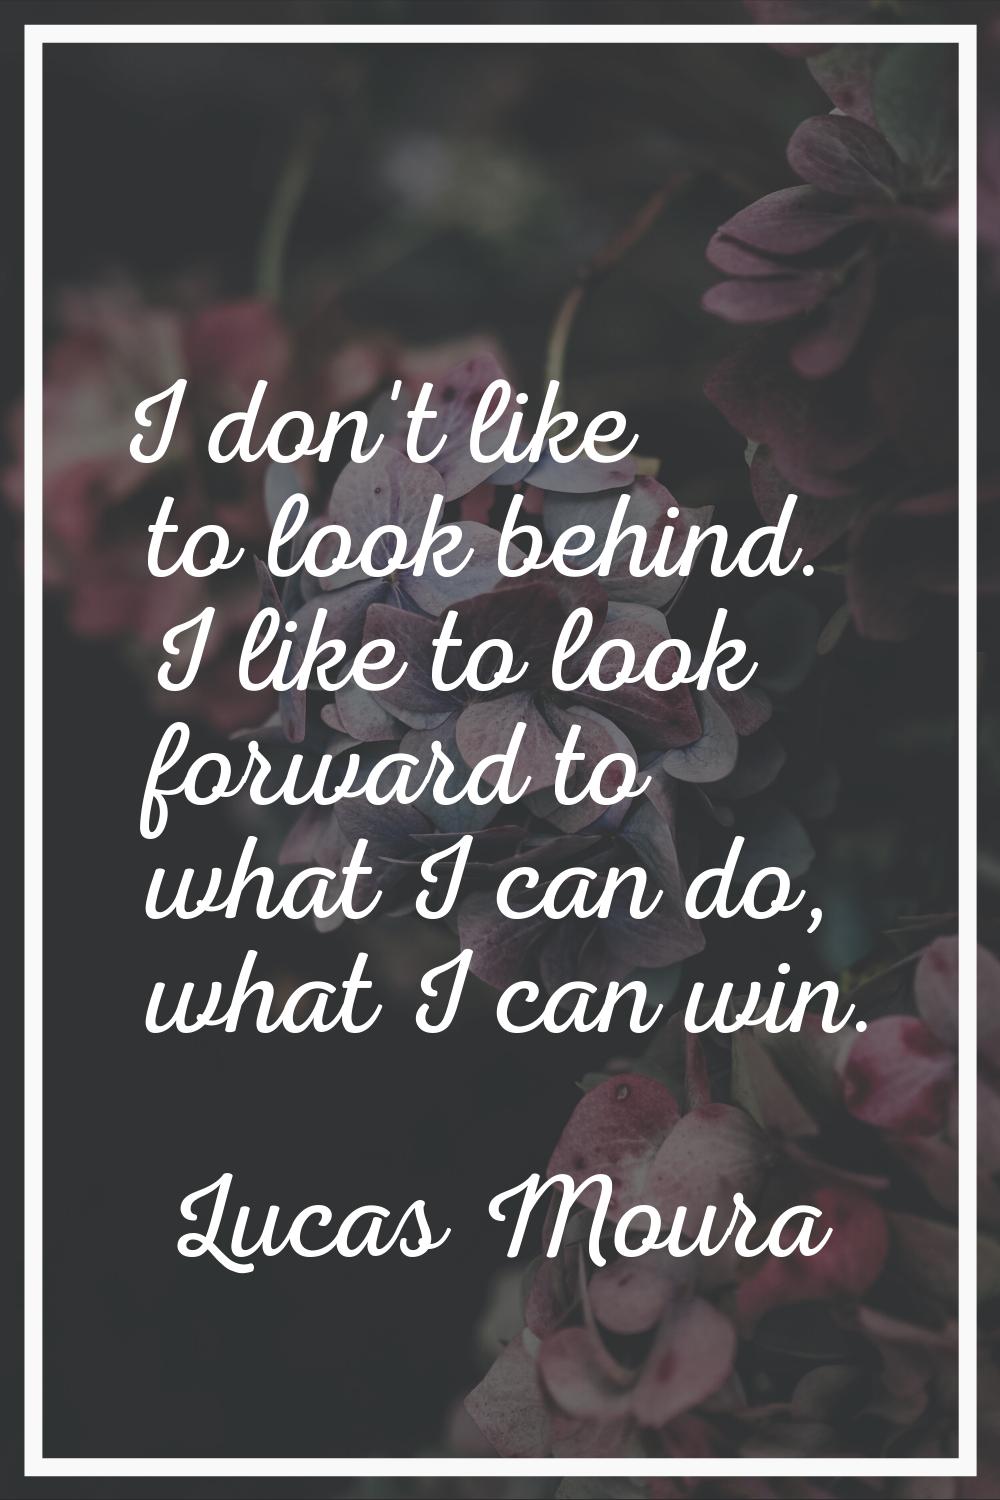 I don't like to look behind. I like to look forward to what I can do, what I can win.